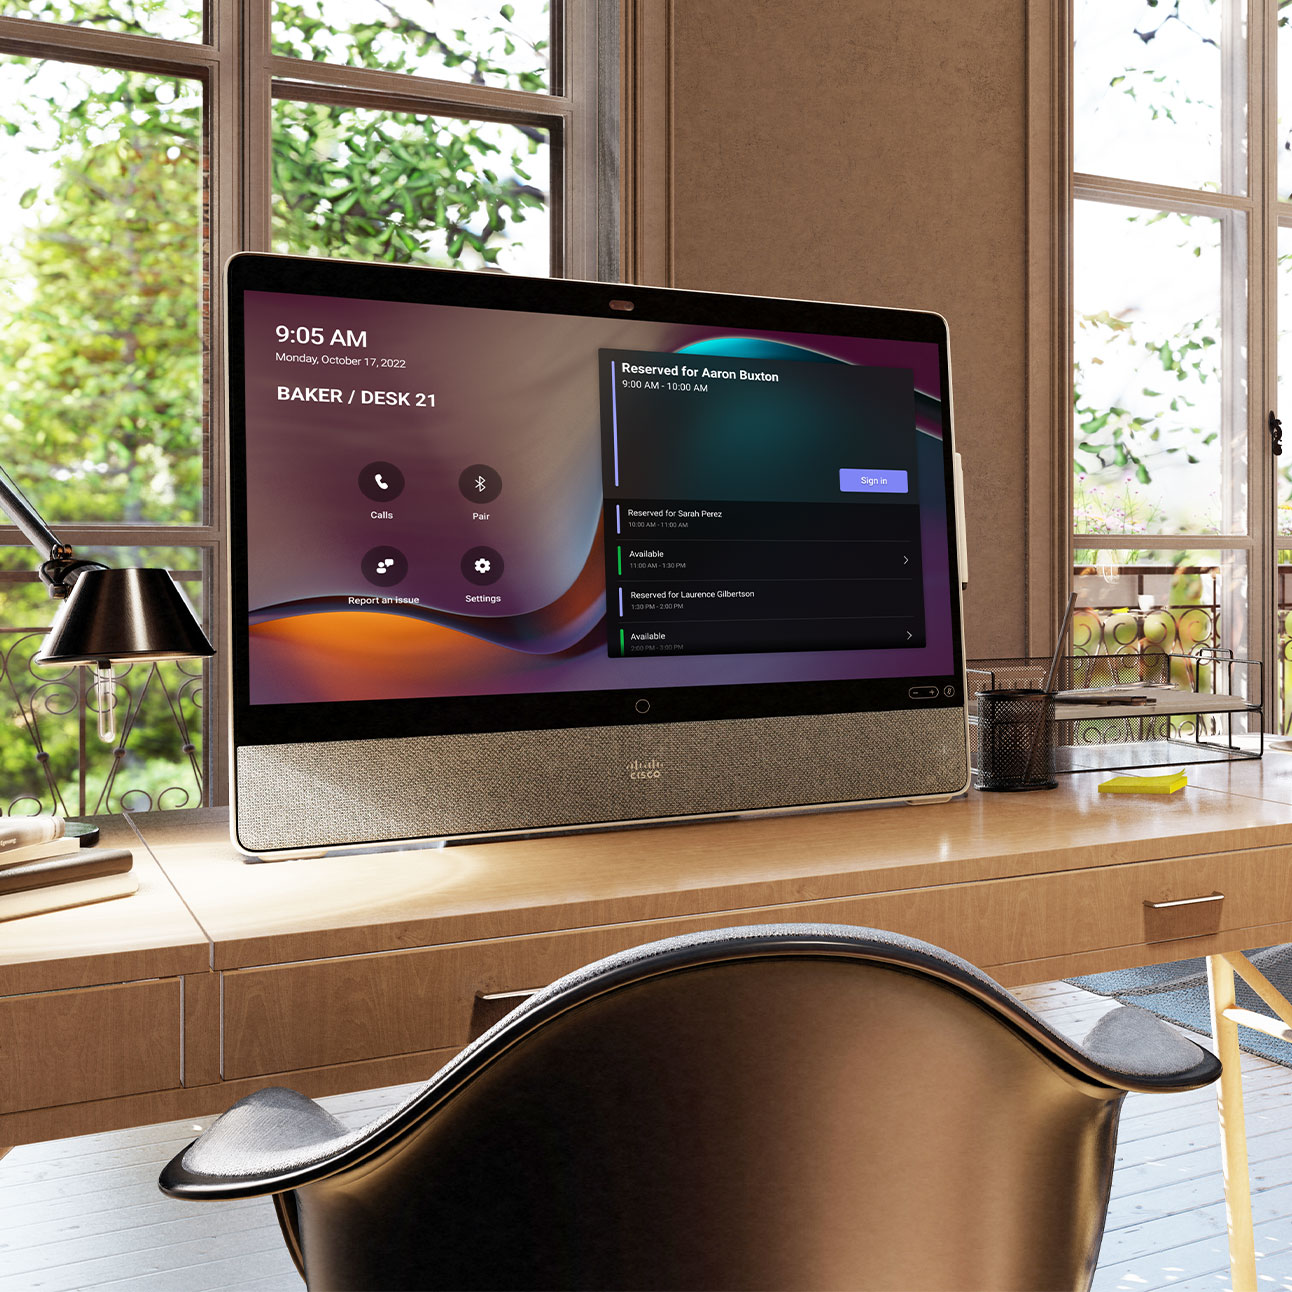 A personal office setting with an all-in-one video conferencing device for Microsoft Teams.